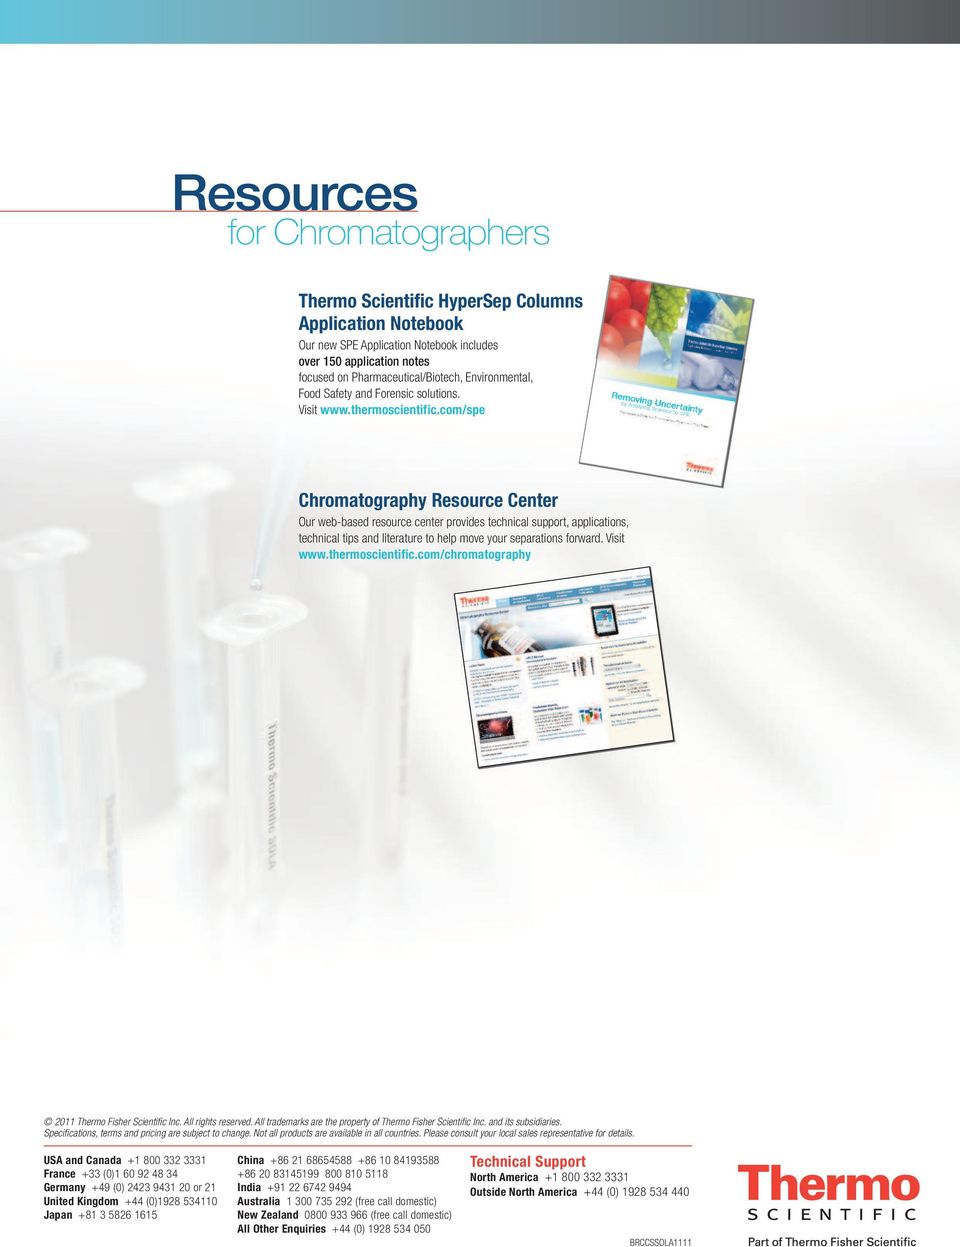 com/spe Chromatography Resource Center Our web-based resource center provides technical support, applications, technical tips and literature to help move your separations forward. Visit www.